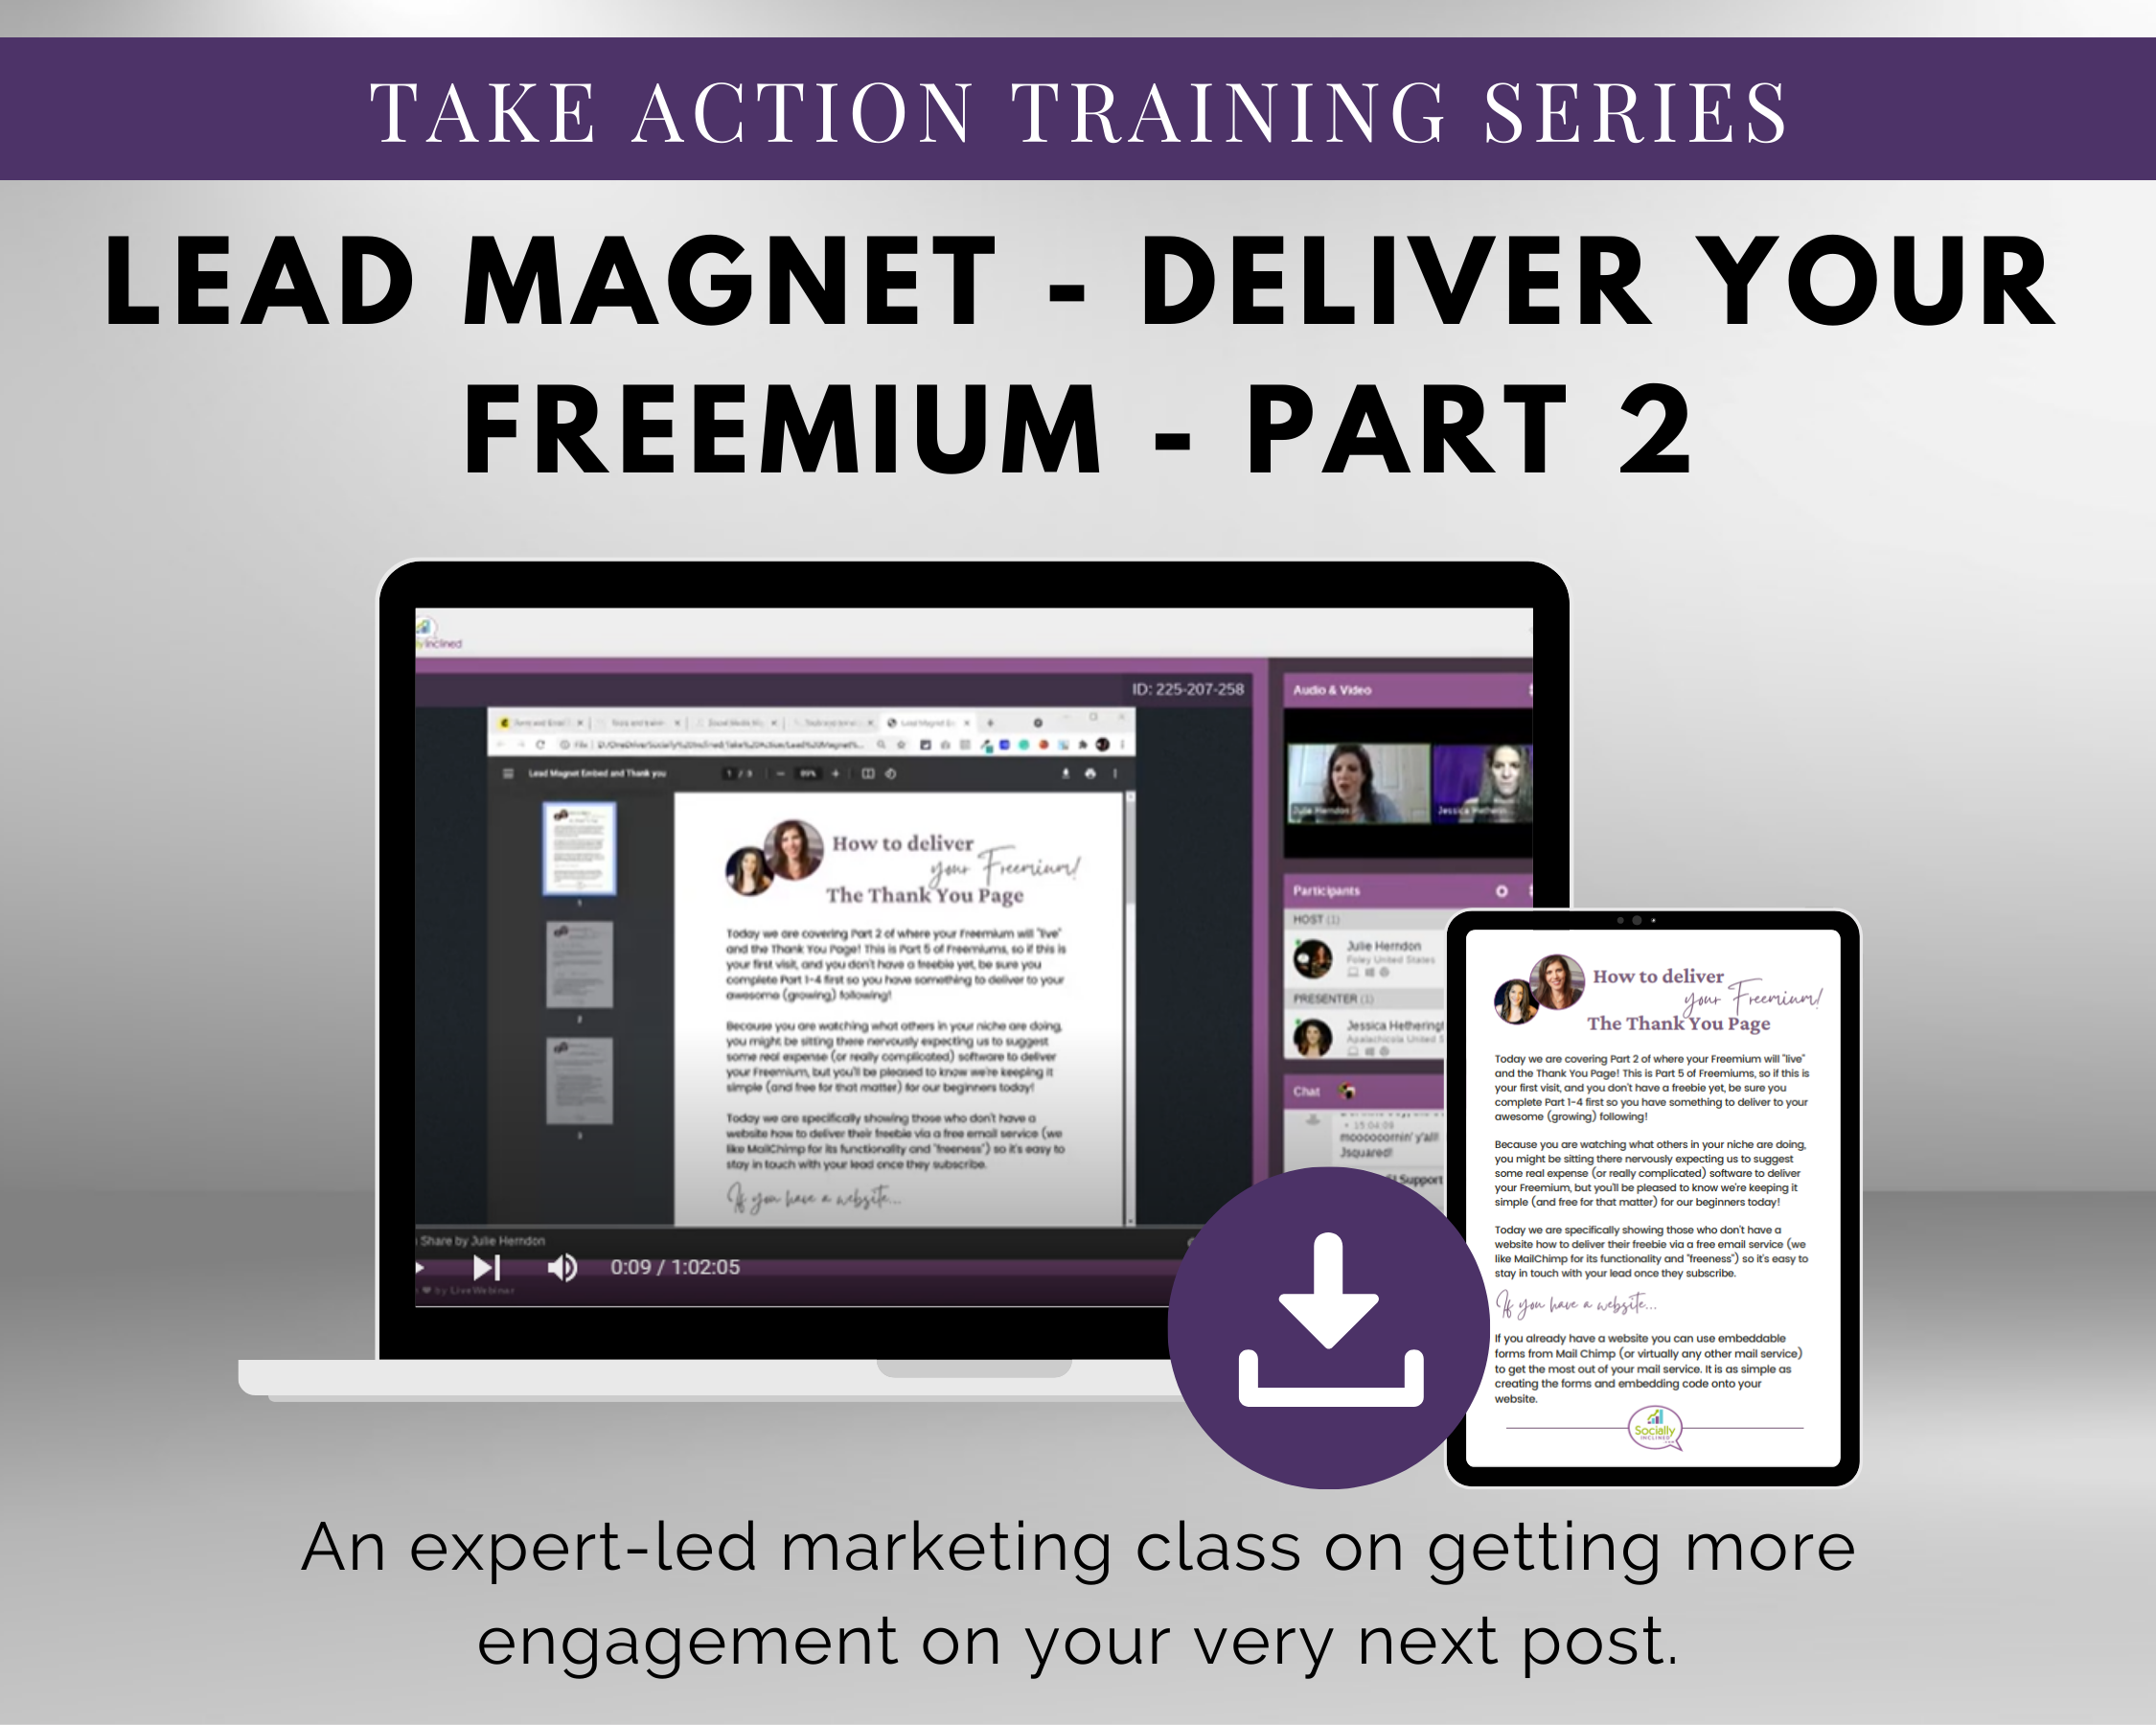 Get Socially Inclined's TAT - Lead Magnet - Deliver Your Freemium - Part 2 Masterclass, delivering exclusive content.